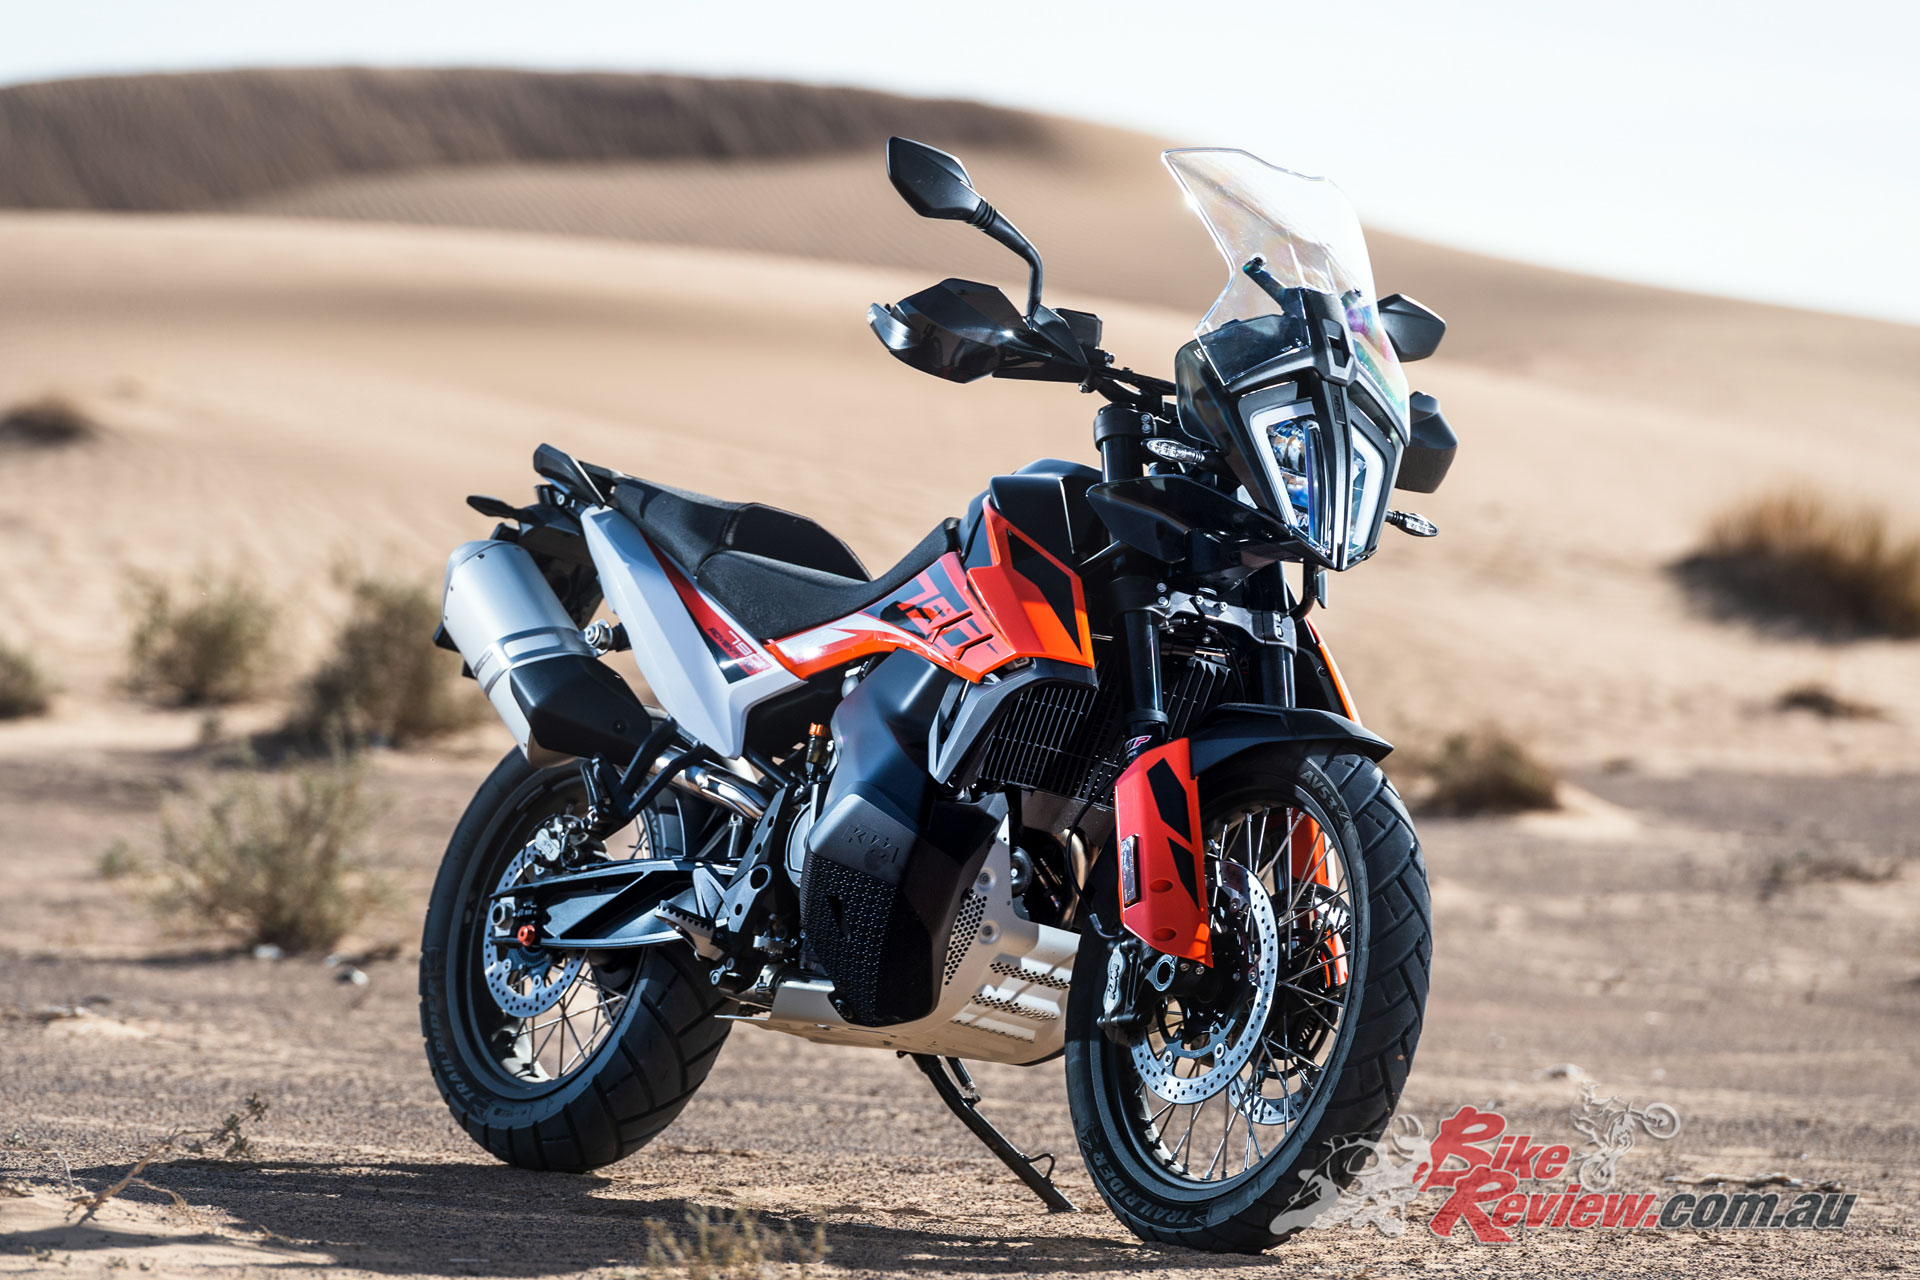 The KTM 790 Adventure offers a breath of fresh air in the adventure category